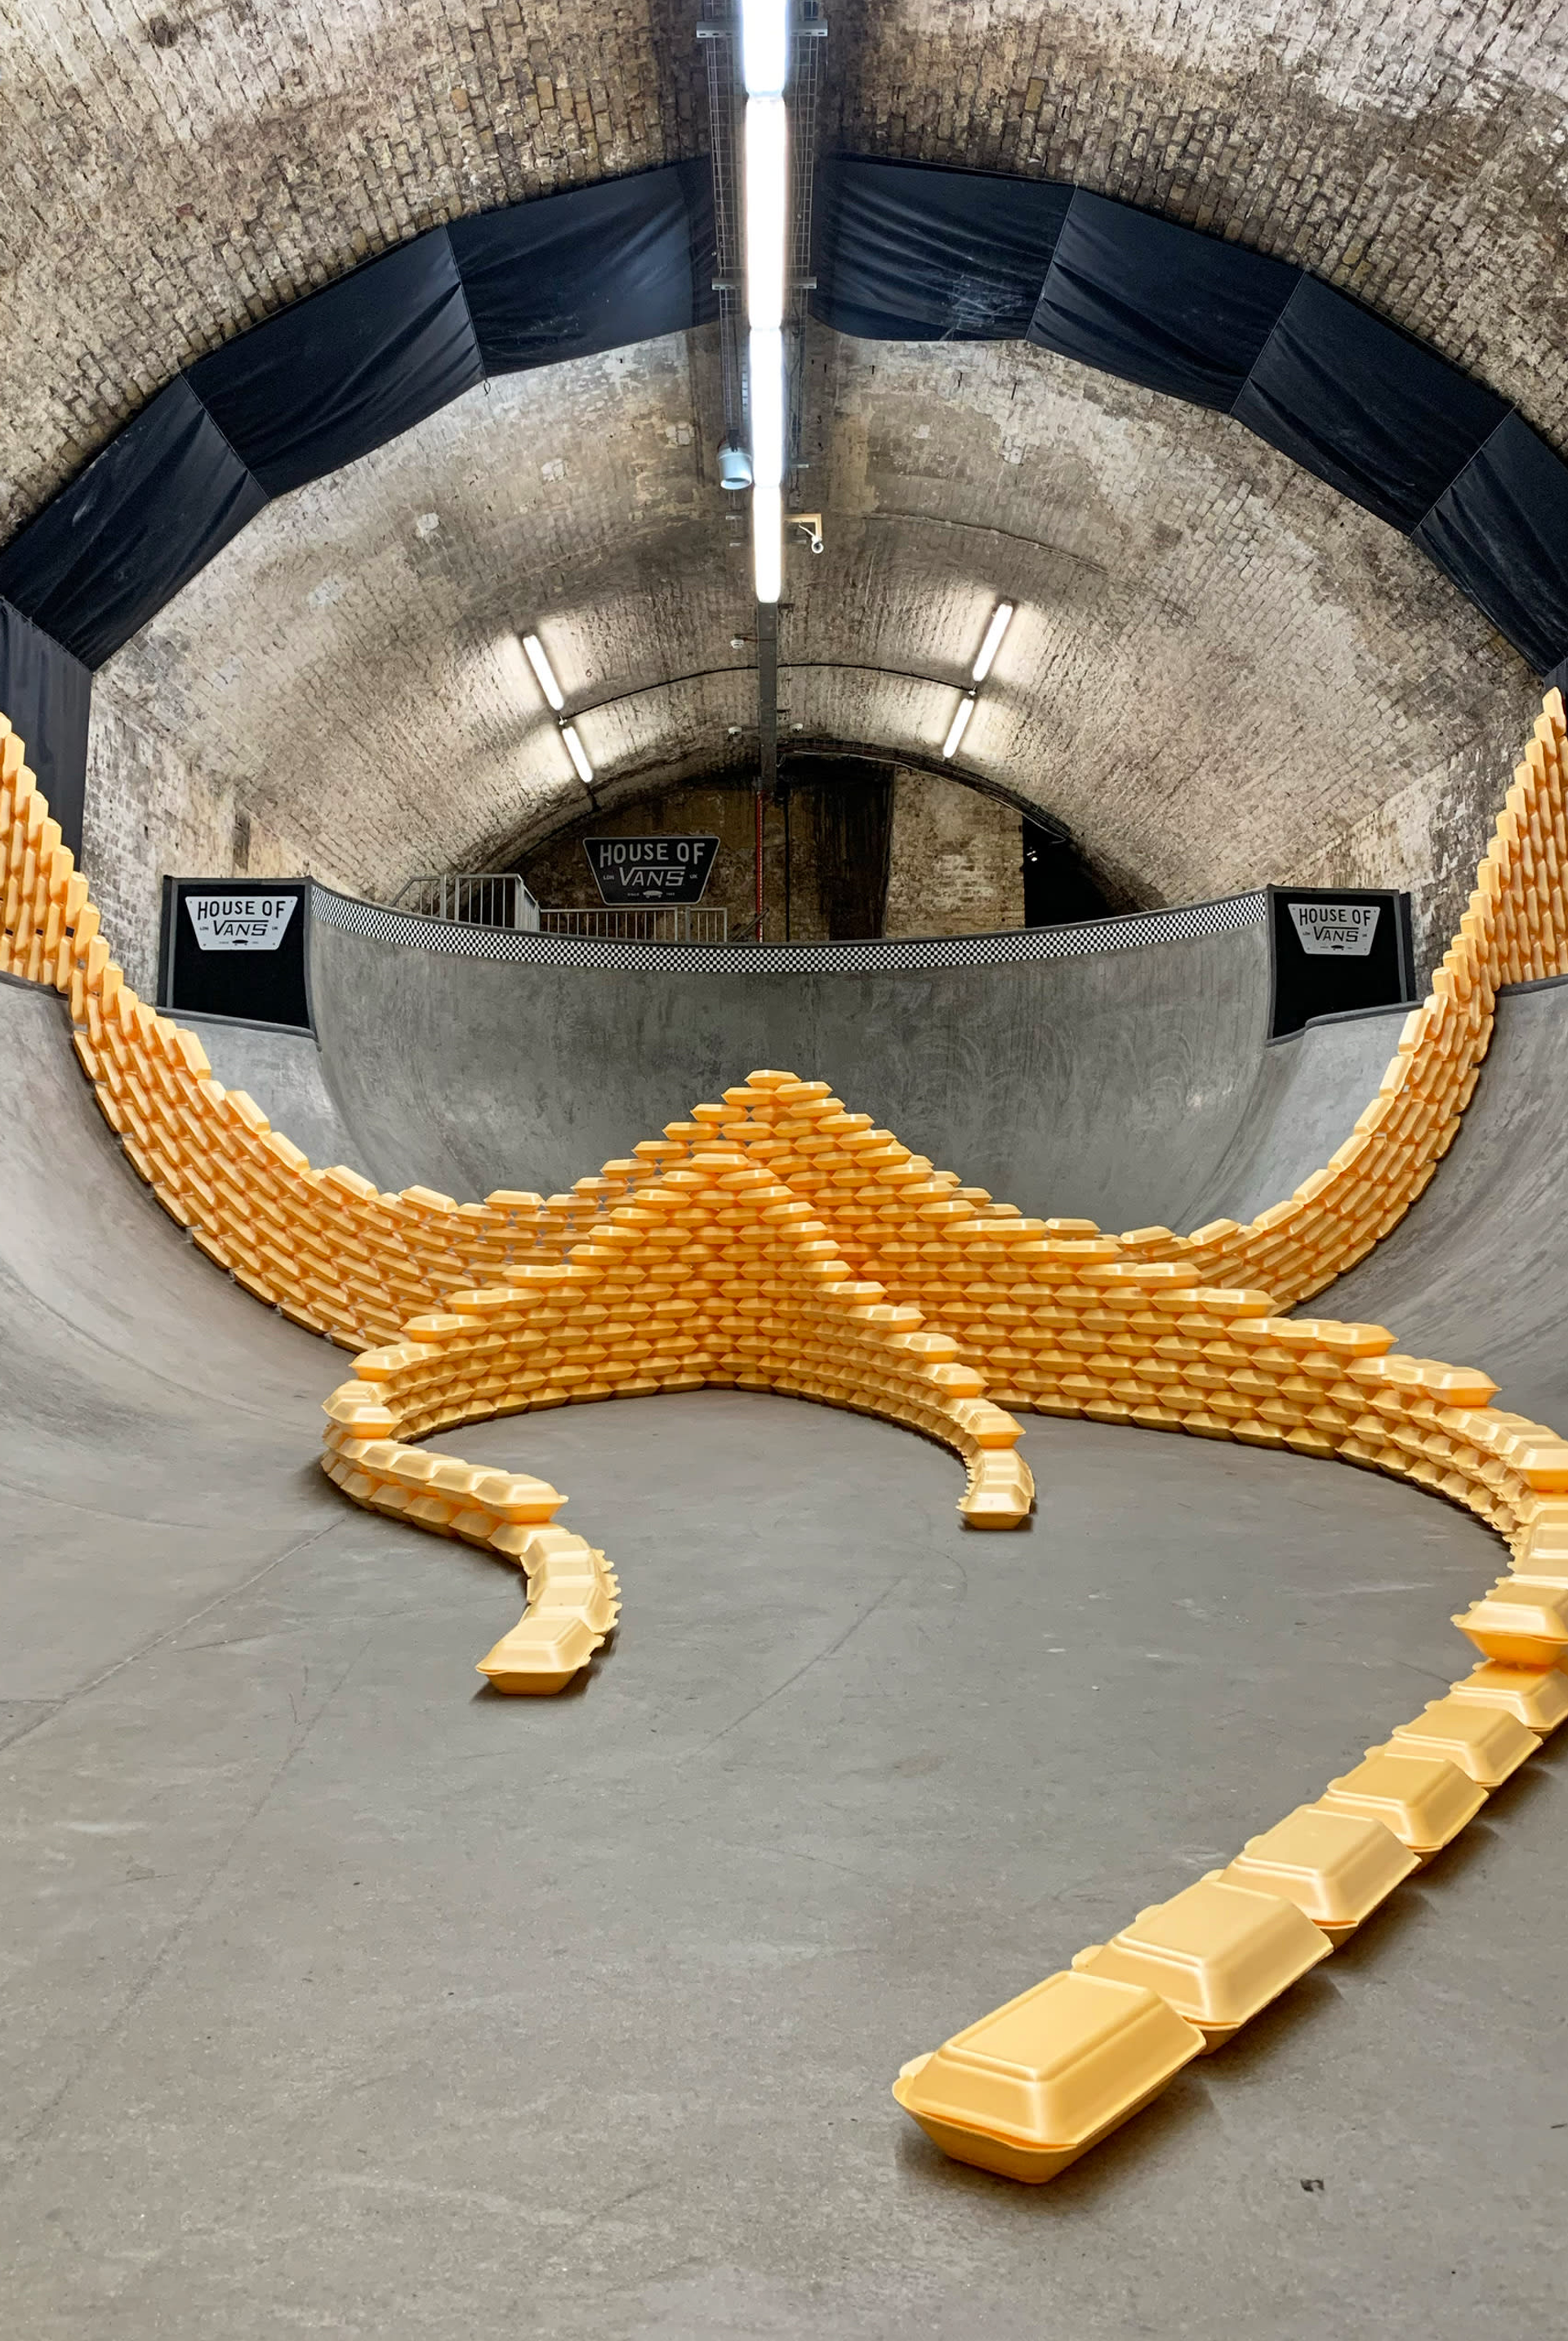  A skate-park inside a tunnel. Sweeping, curved, wall-like structures, composed of yellow polystyrene takeaway boxes are at the centre of the image. By Jacob Talkowski.